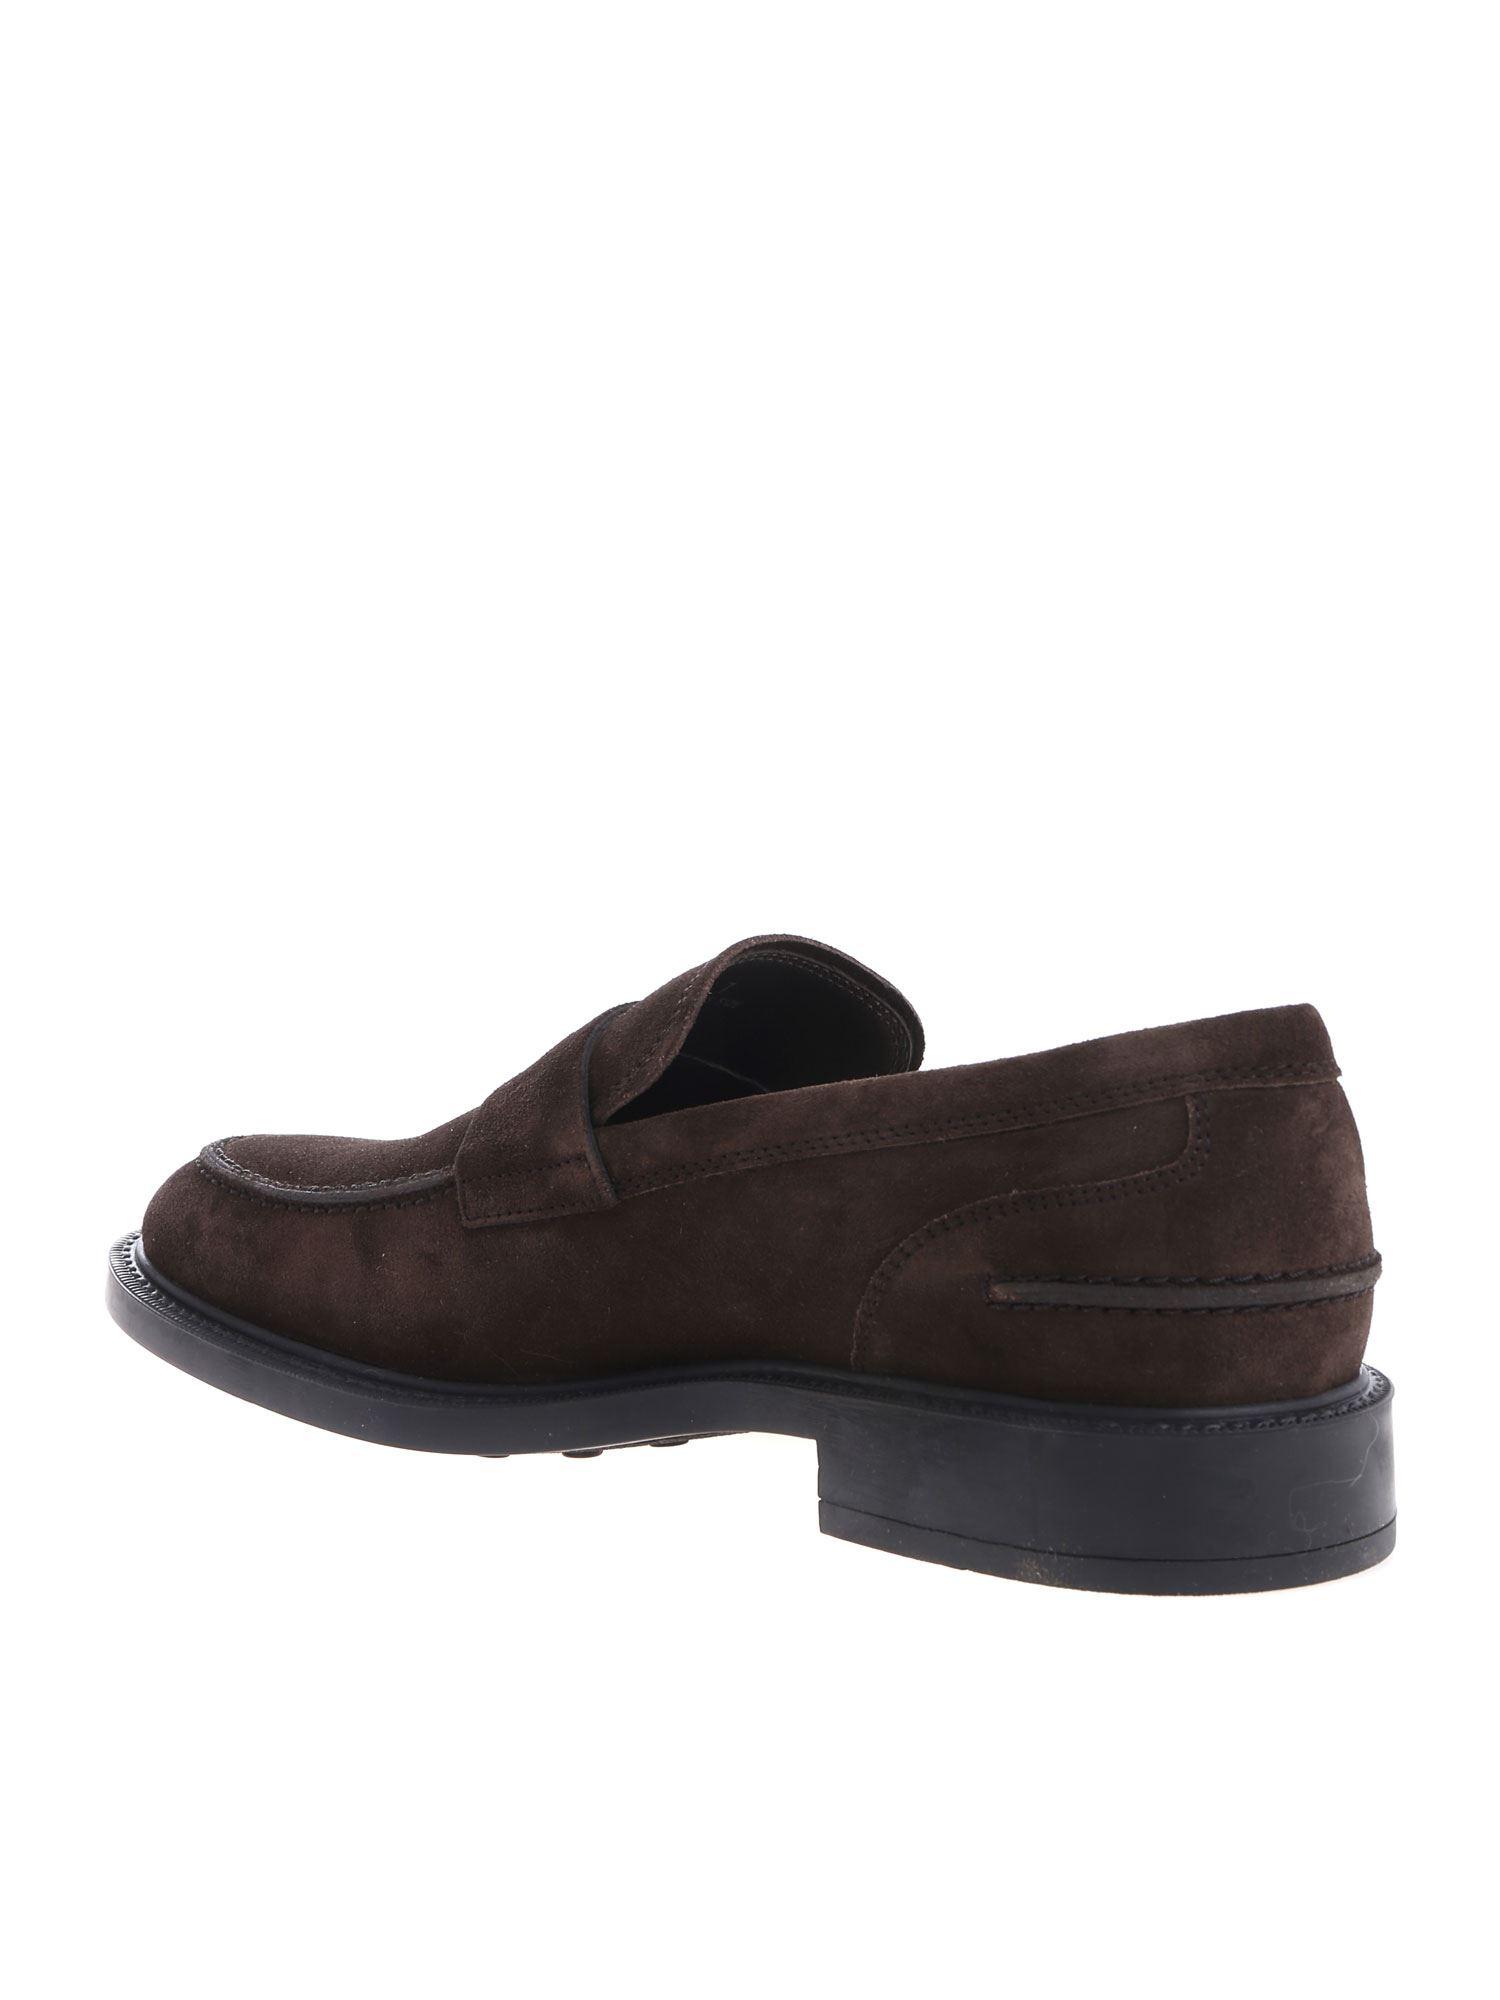 Tod's Men's Loafers In Brown Suede for Men - Lyst